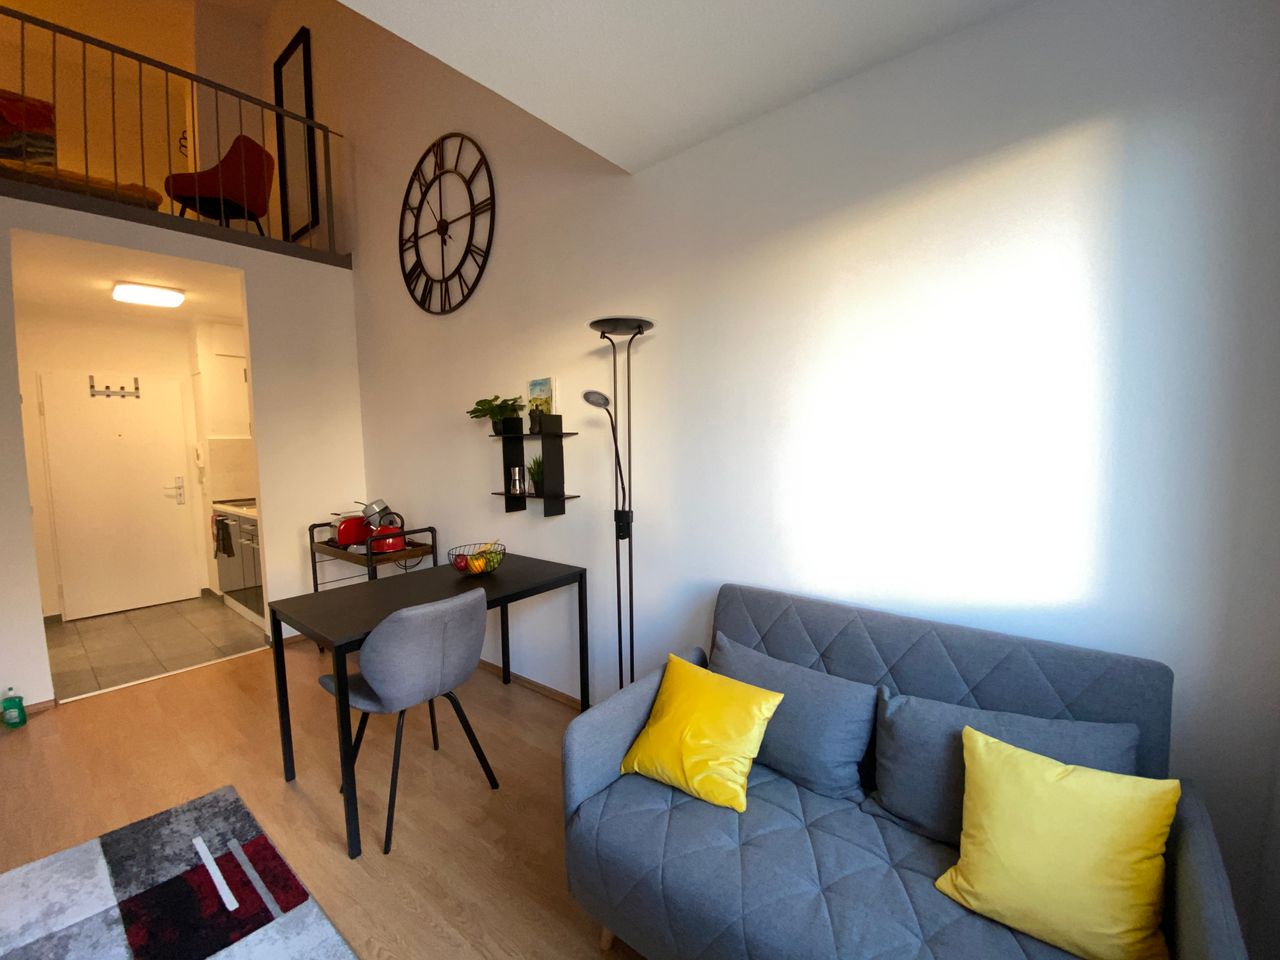 Bright & furnished maisonette apartment with loft character